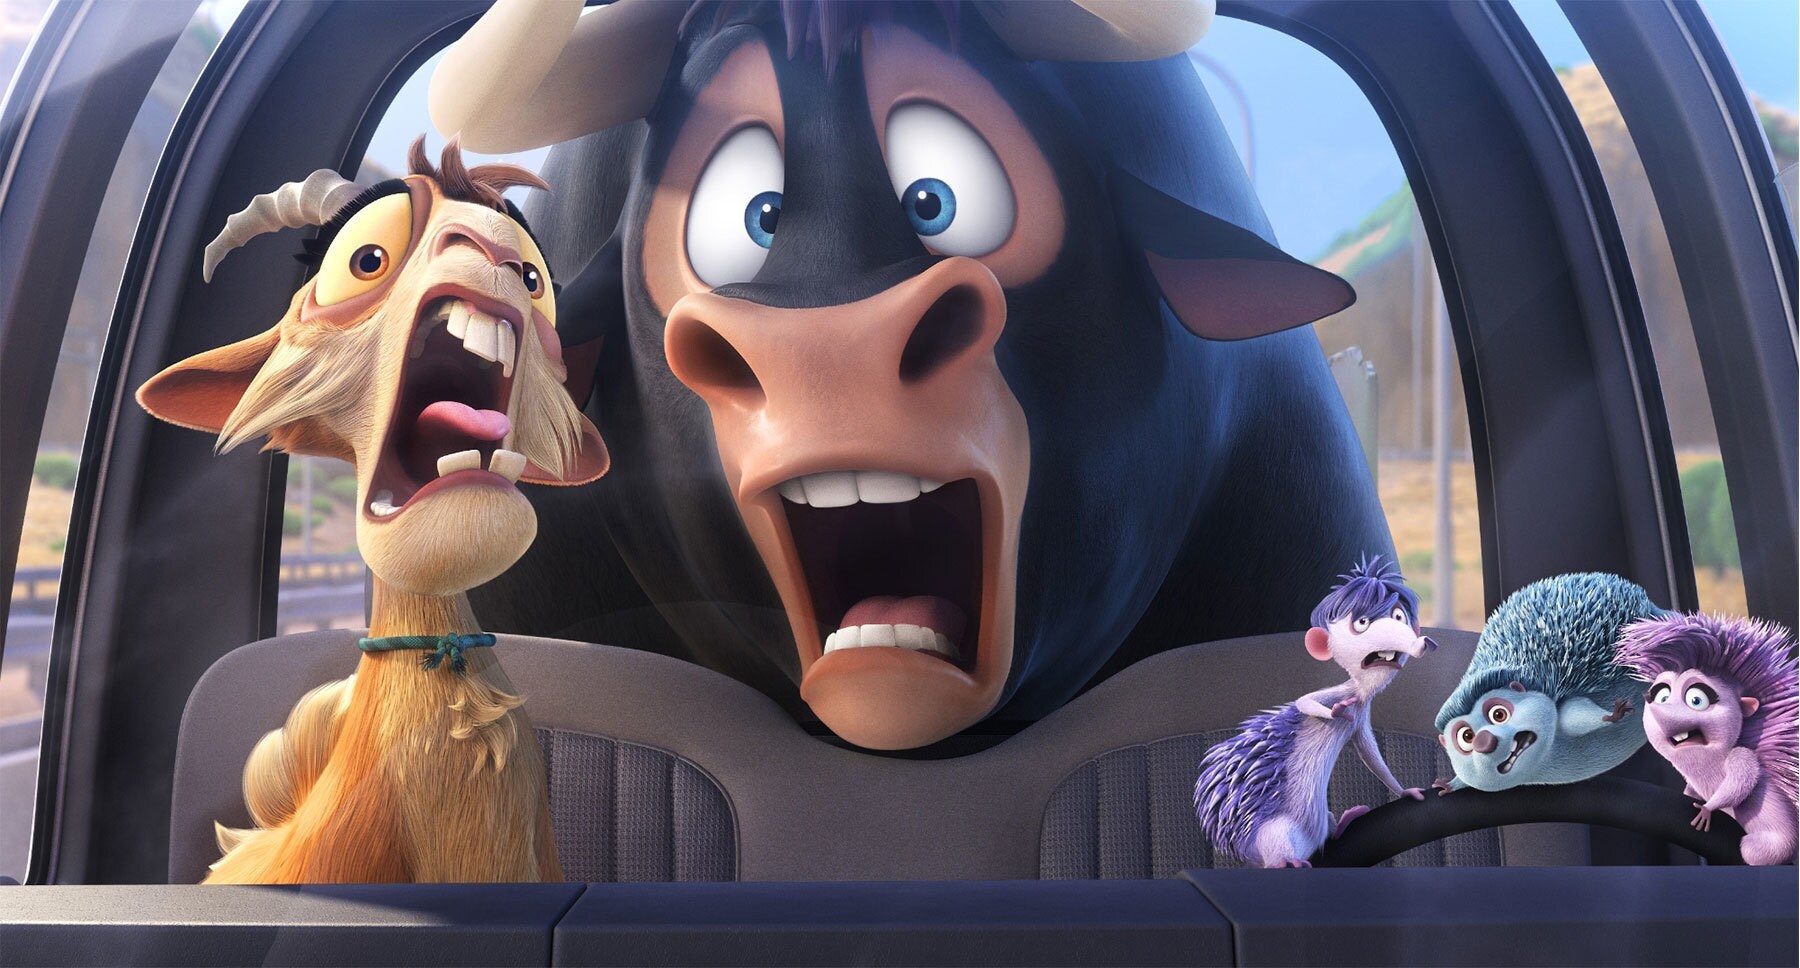 Actors Gabriel Iglesias, Kate McKinnon, John Cena, Gina Rodriguez, and Daveed Diggs as their animated characters in the movie "Ferdinand"